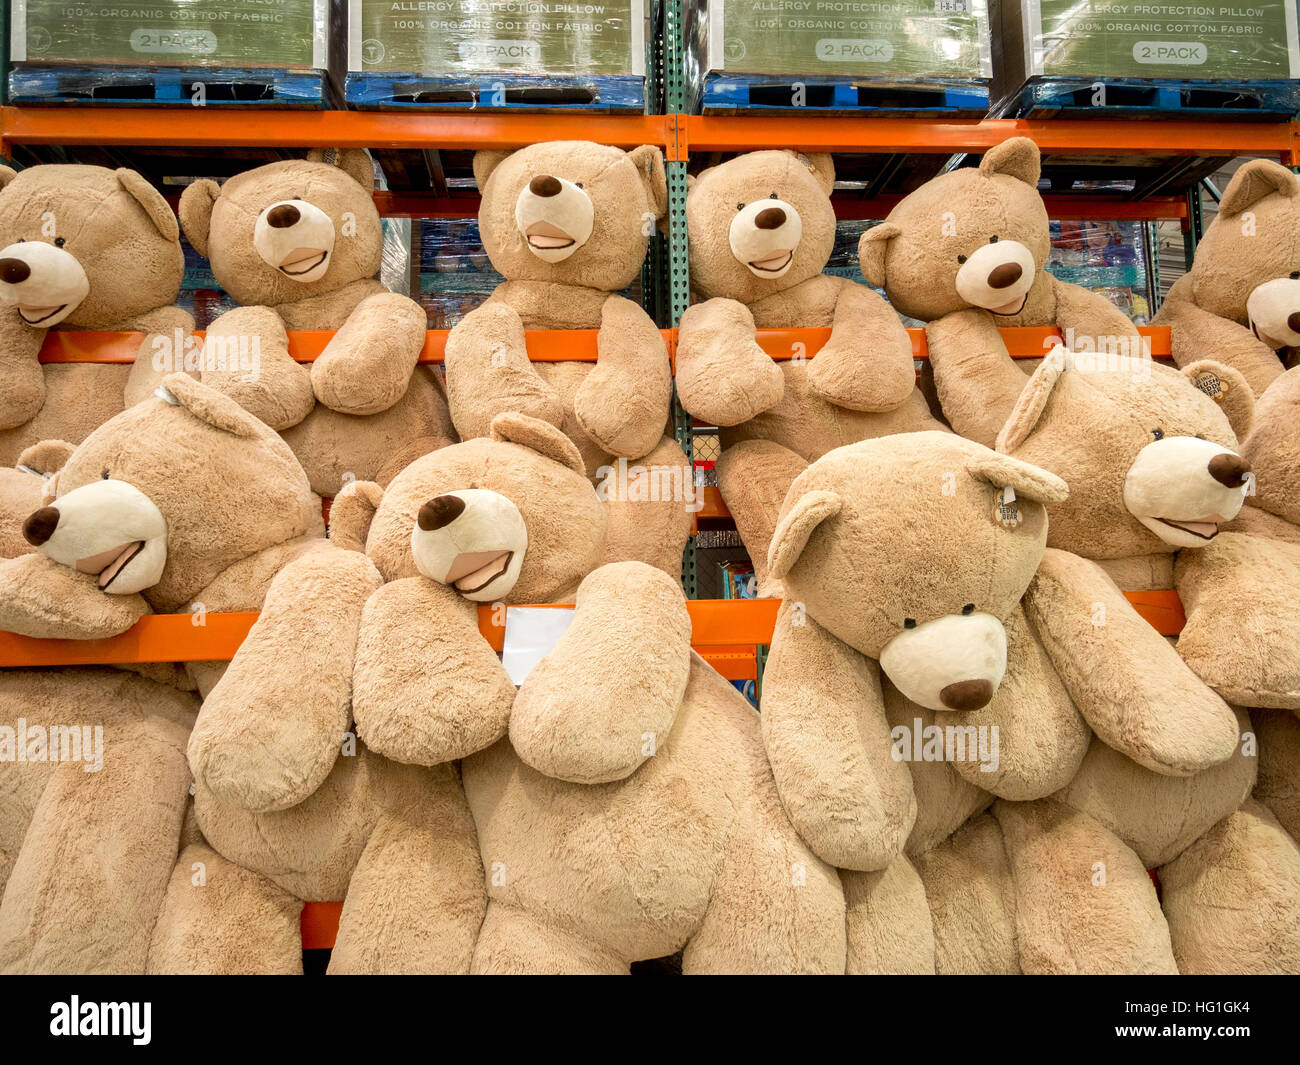 Giant teddy bears are for sale at a 